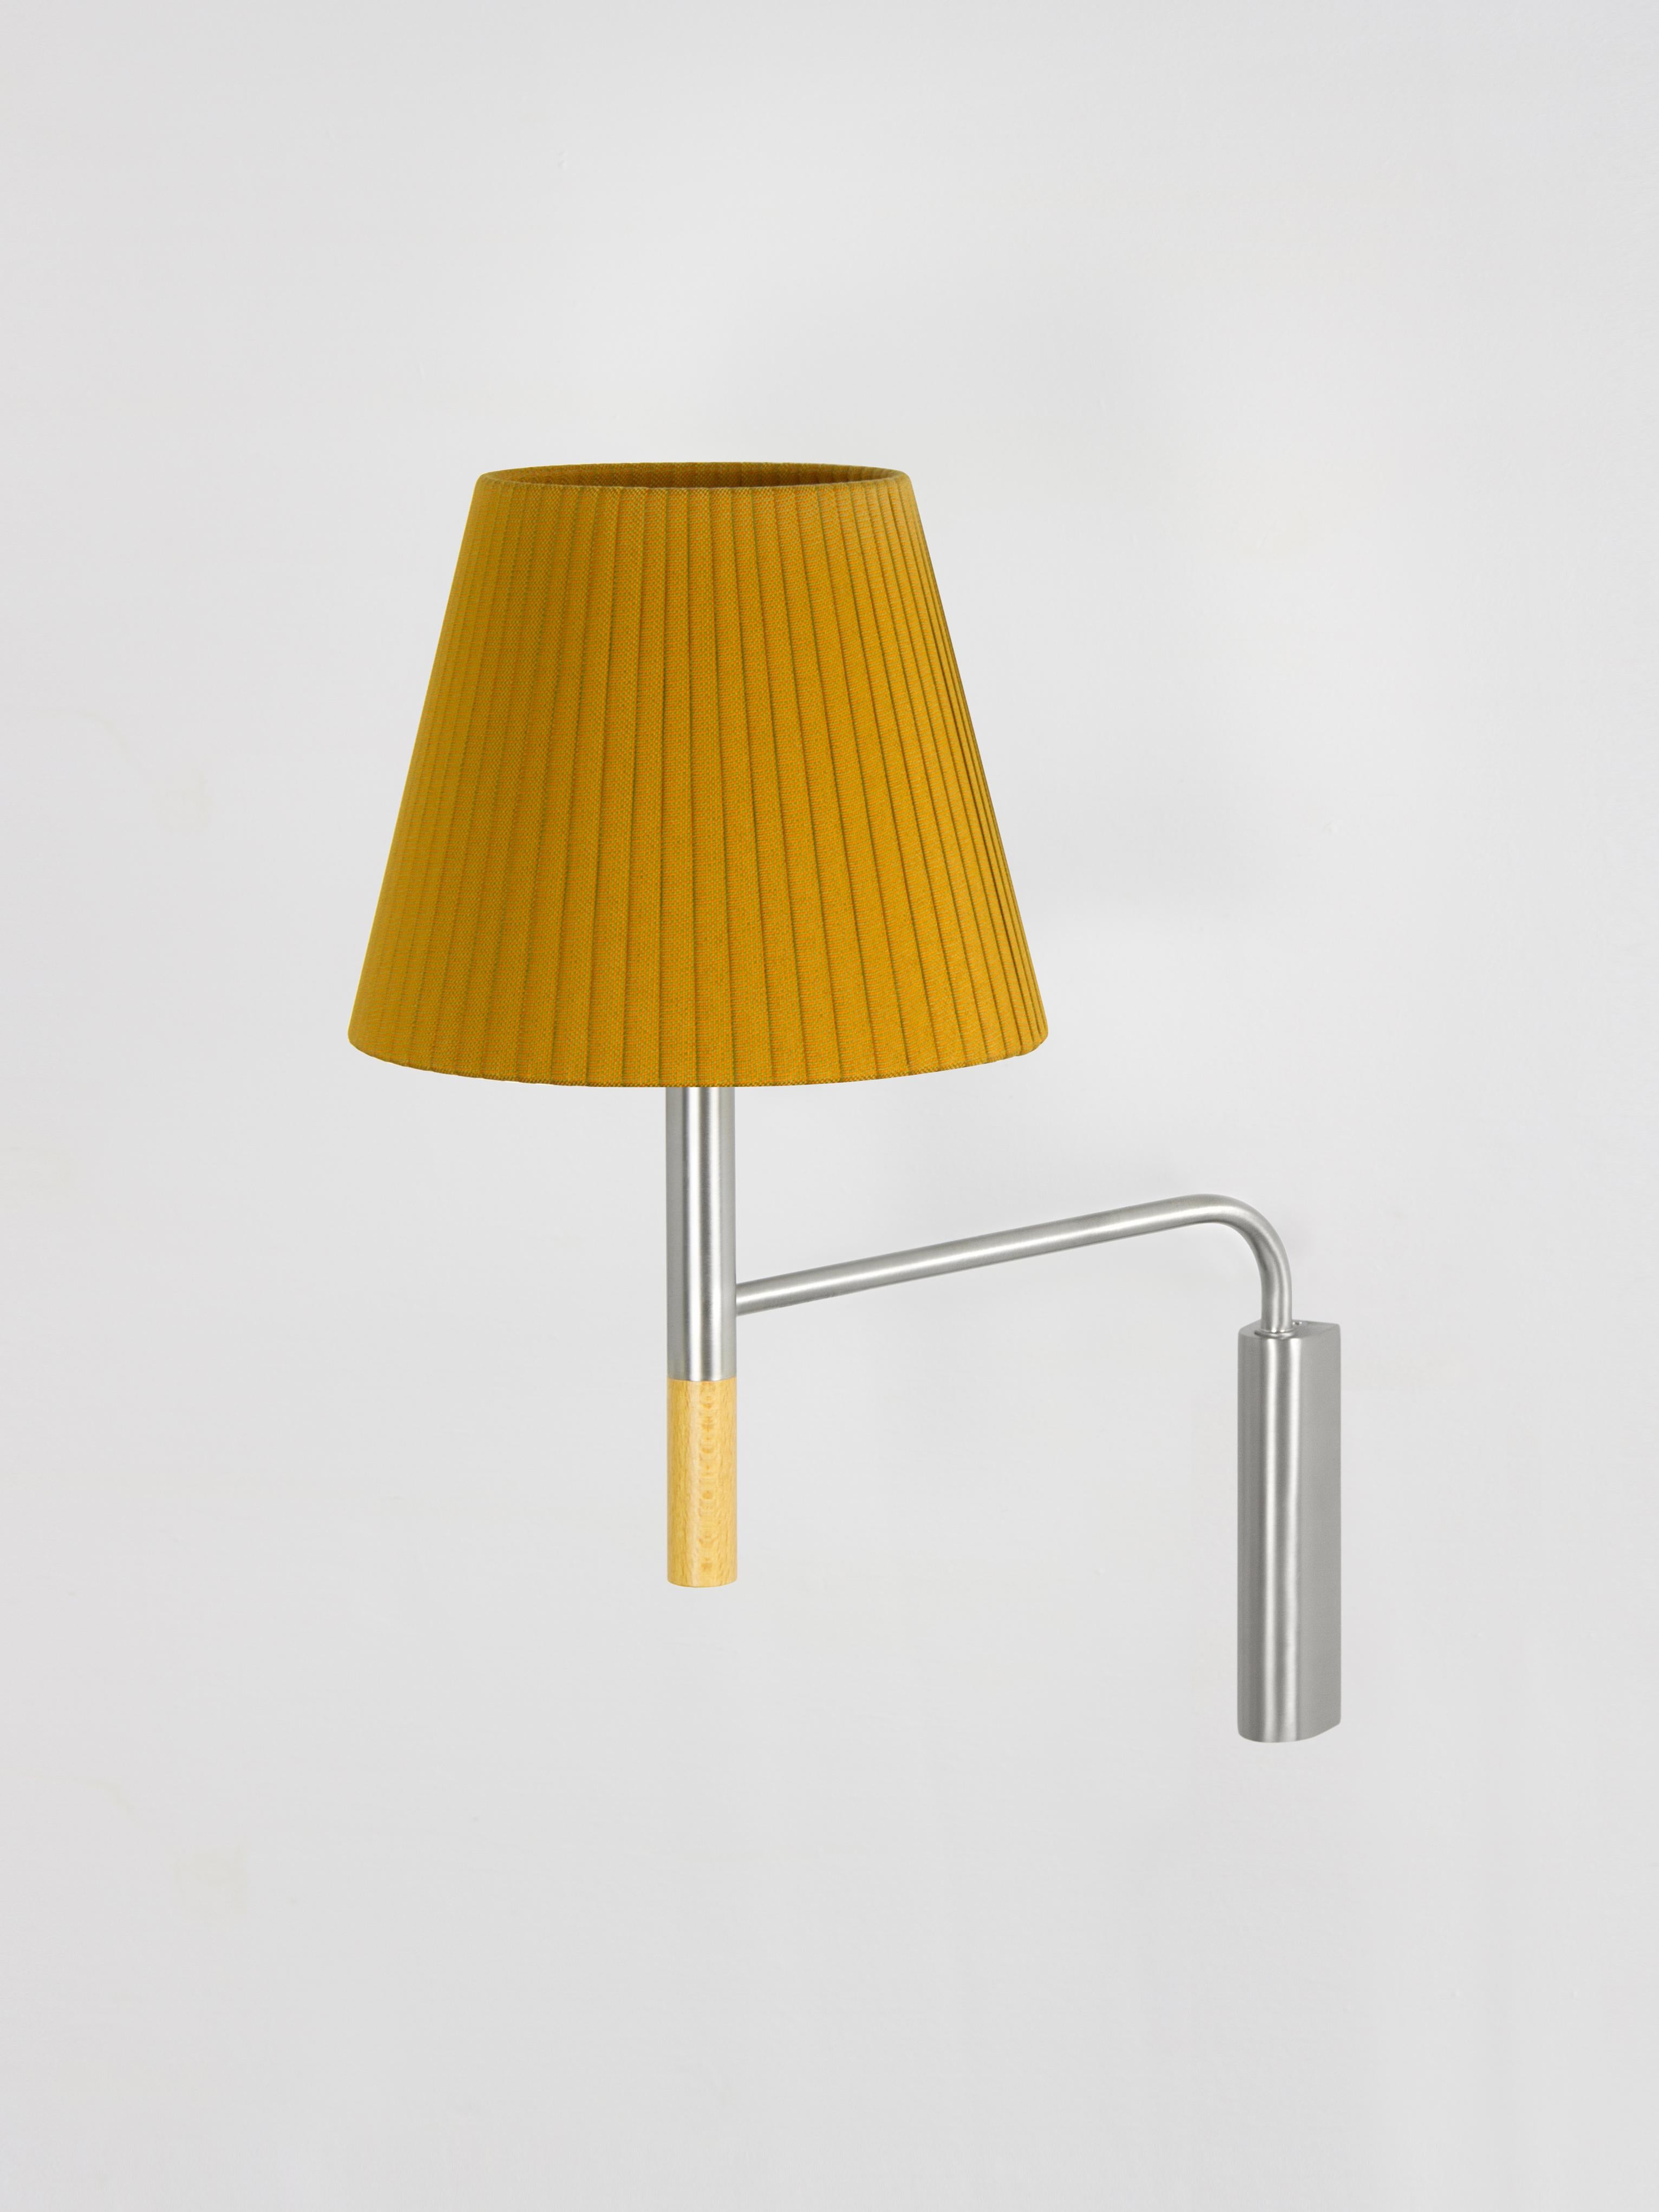 Mustard BC3 wall lamp by Santa & Cole
Dimensions: D 20 x W 37 x H 41 cm
Materials: Metal, beech wood, ribbon.

The BC1, BC2 and BC3 wall lamps are the epitome of sturdy construction, aesthetic sobriety and functional quality. Their various shade